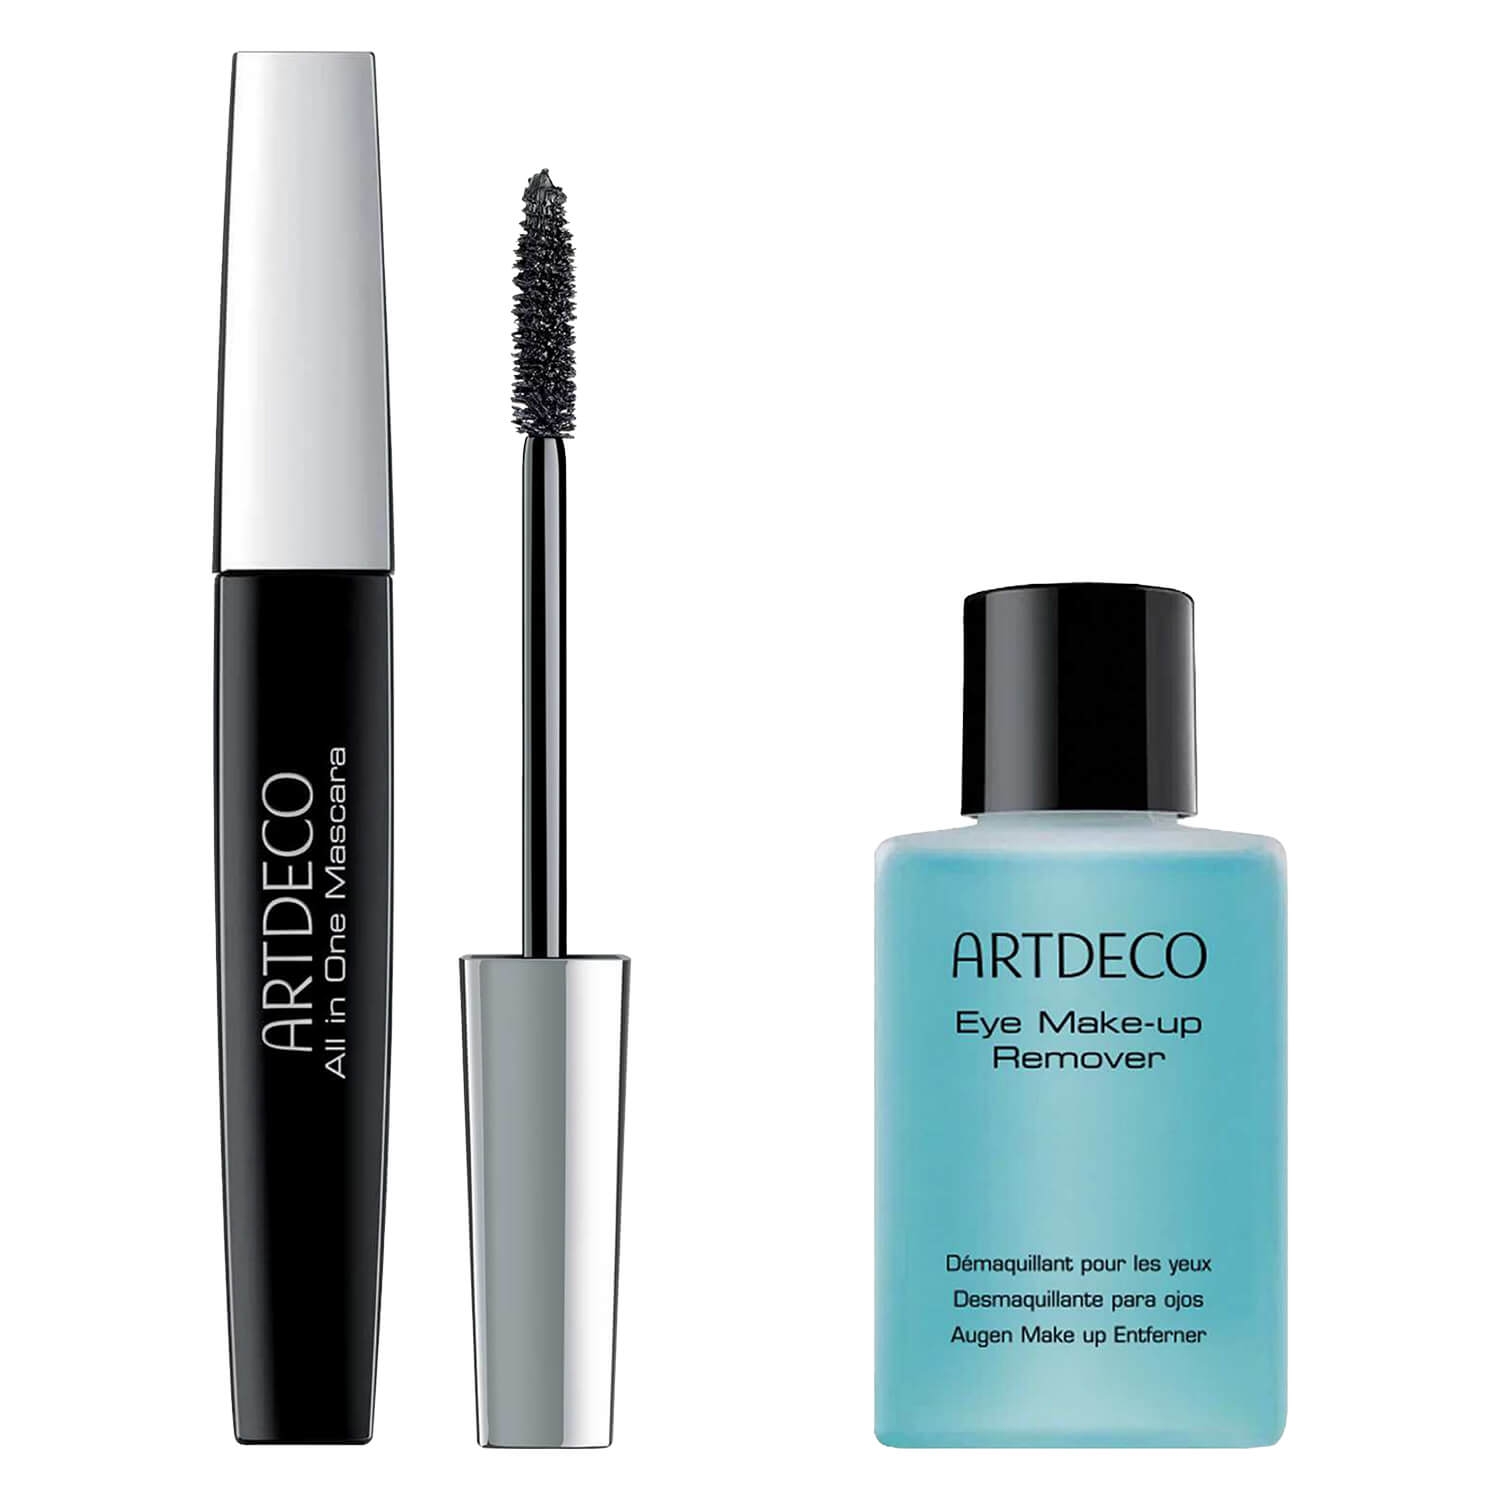 Product image from Artdeco Specials - All in One Mascara & Eye Make Make-up Remover Set